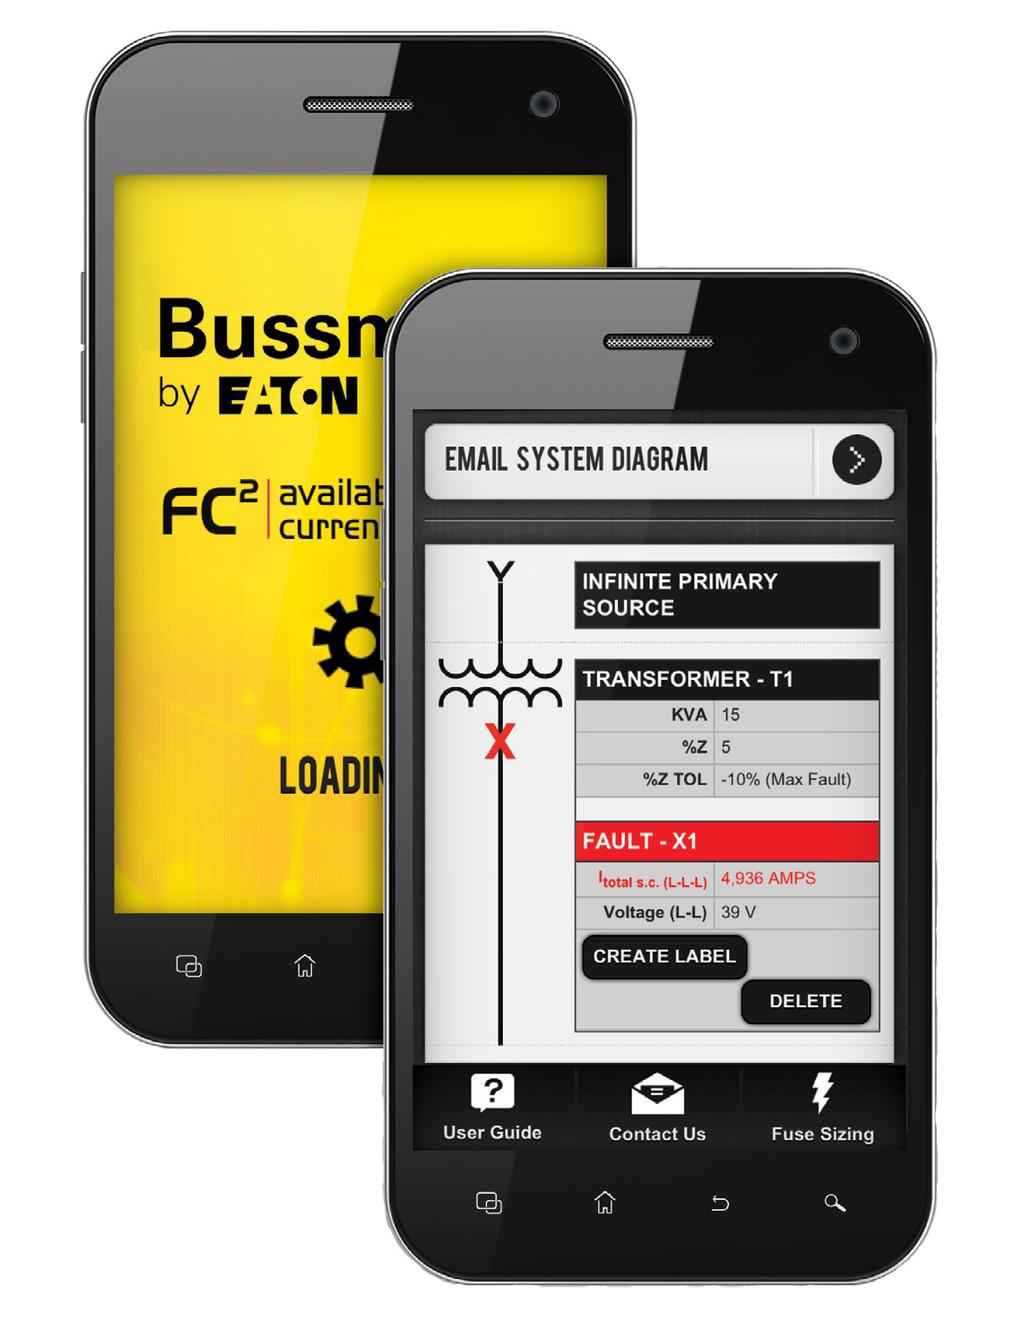 NUMBER THREE Find Fault Current Fast Bussmann by Eaton FC 2 Available Fault Current Calculator The first fully-functioning mobile app that allows the use of standard mobile devices to calculate